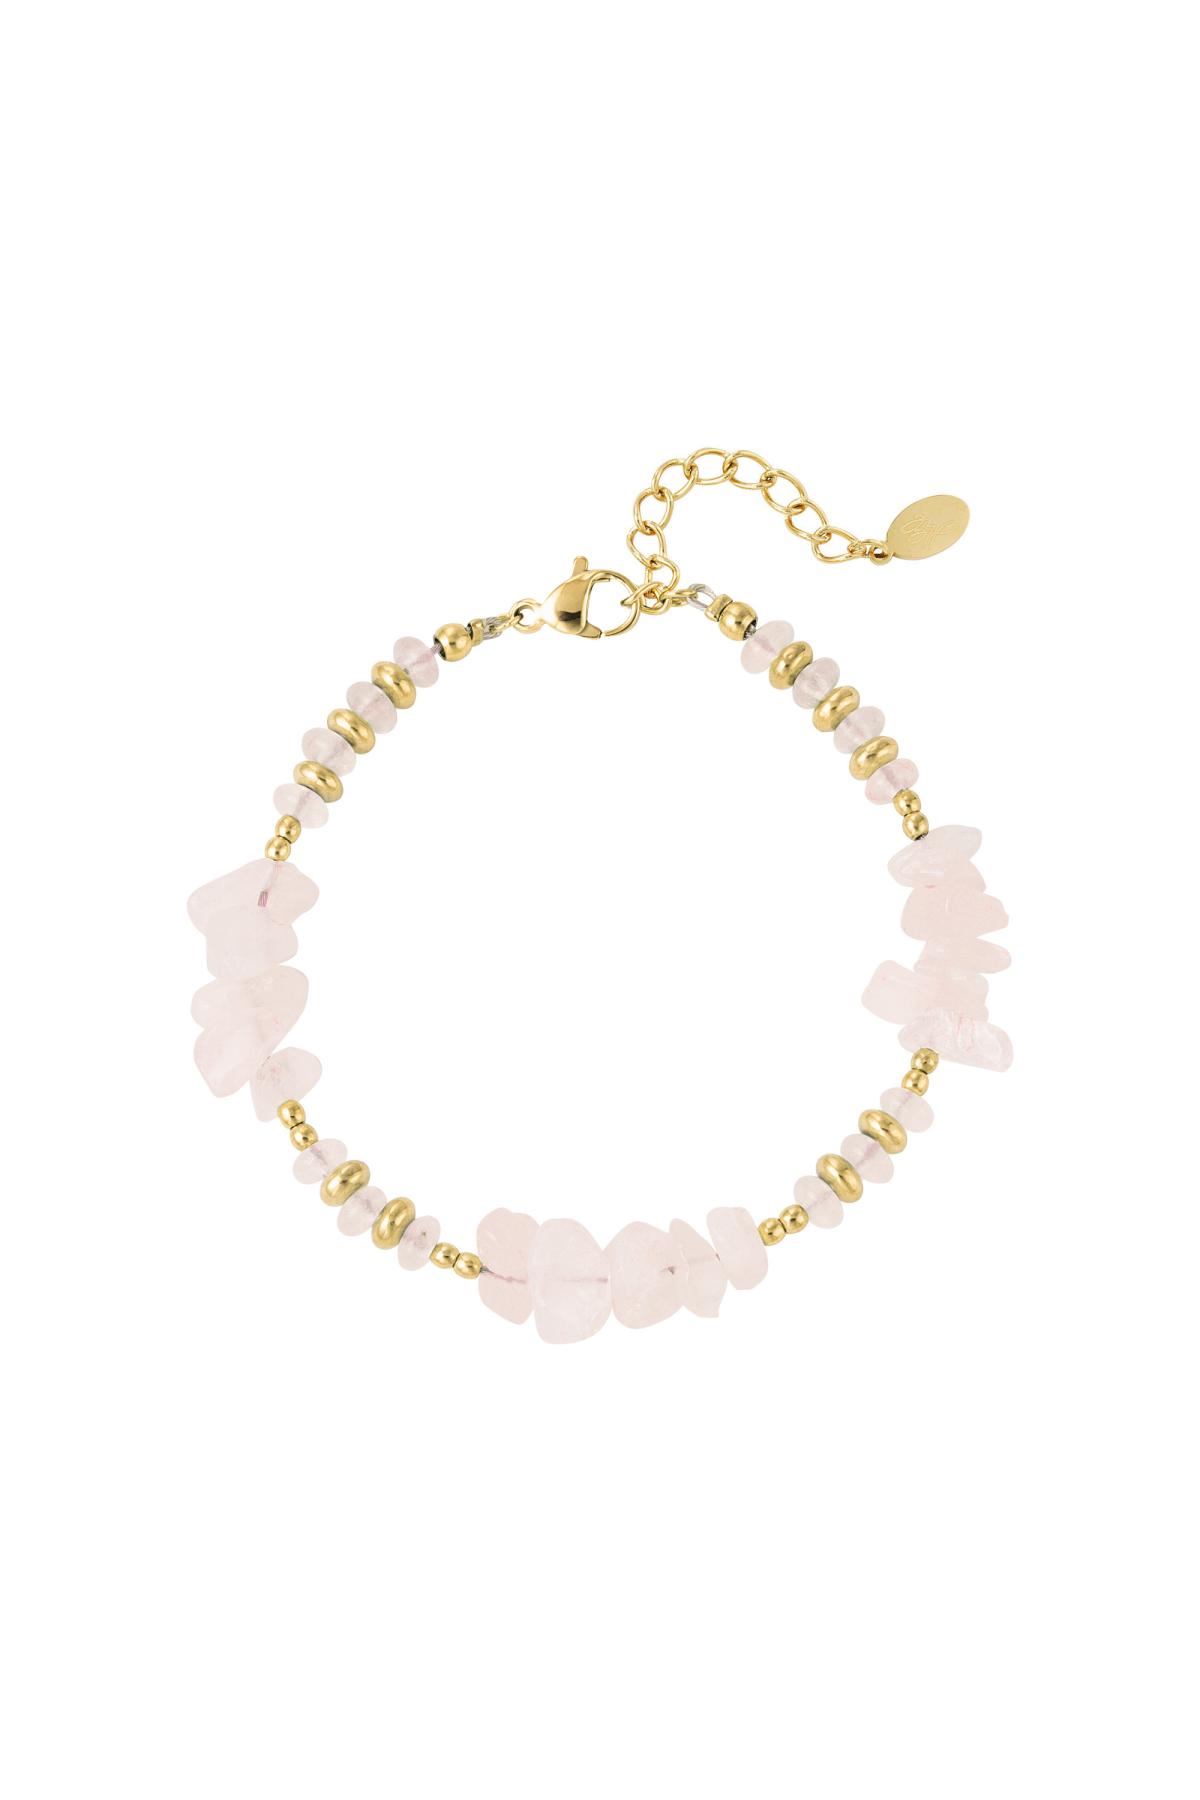 Bracelet different beads - Natural stones collection Pink &amp; Gold